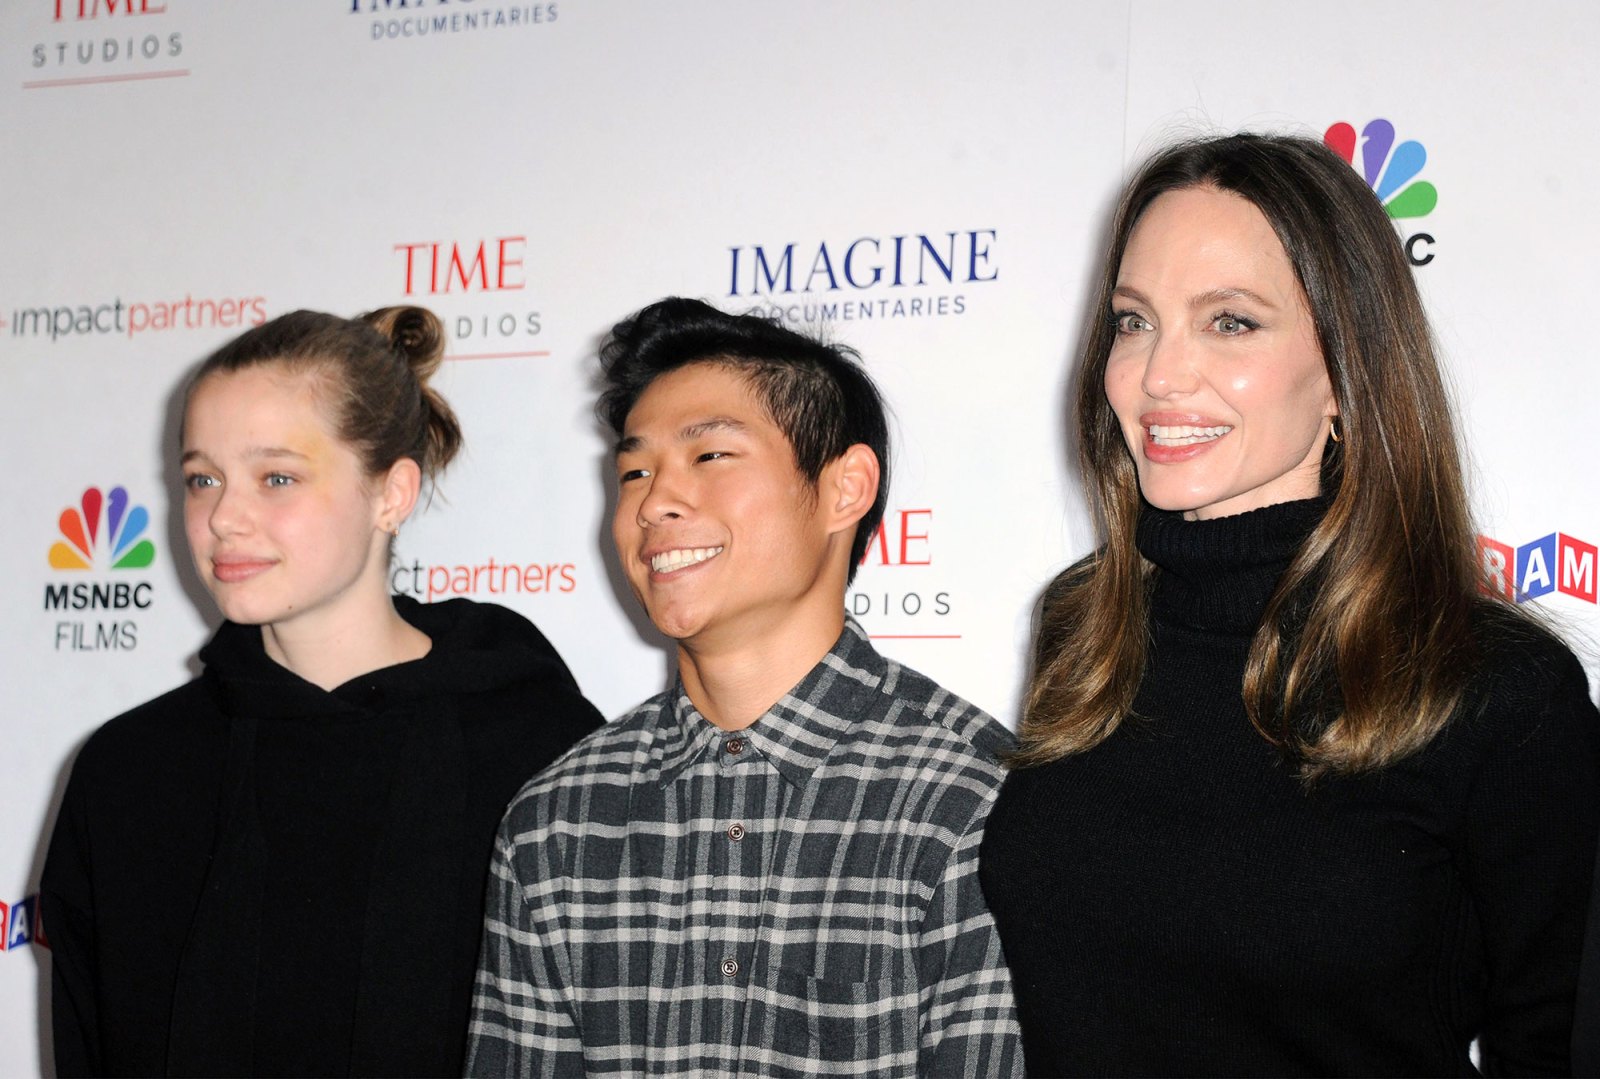 Angelina Jolie Brings Shiloh and Pax to Paper and Glue Documentary Premiere